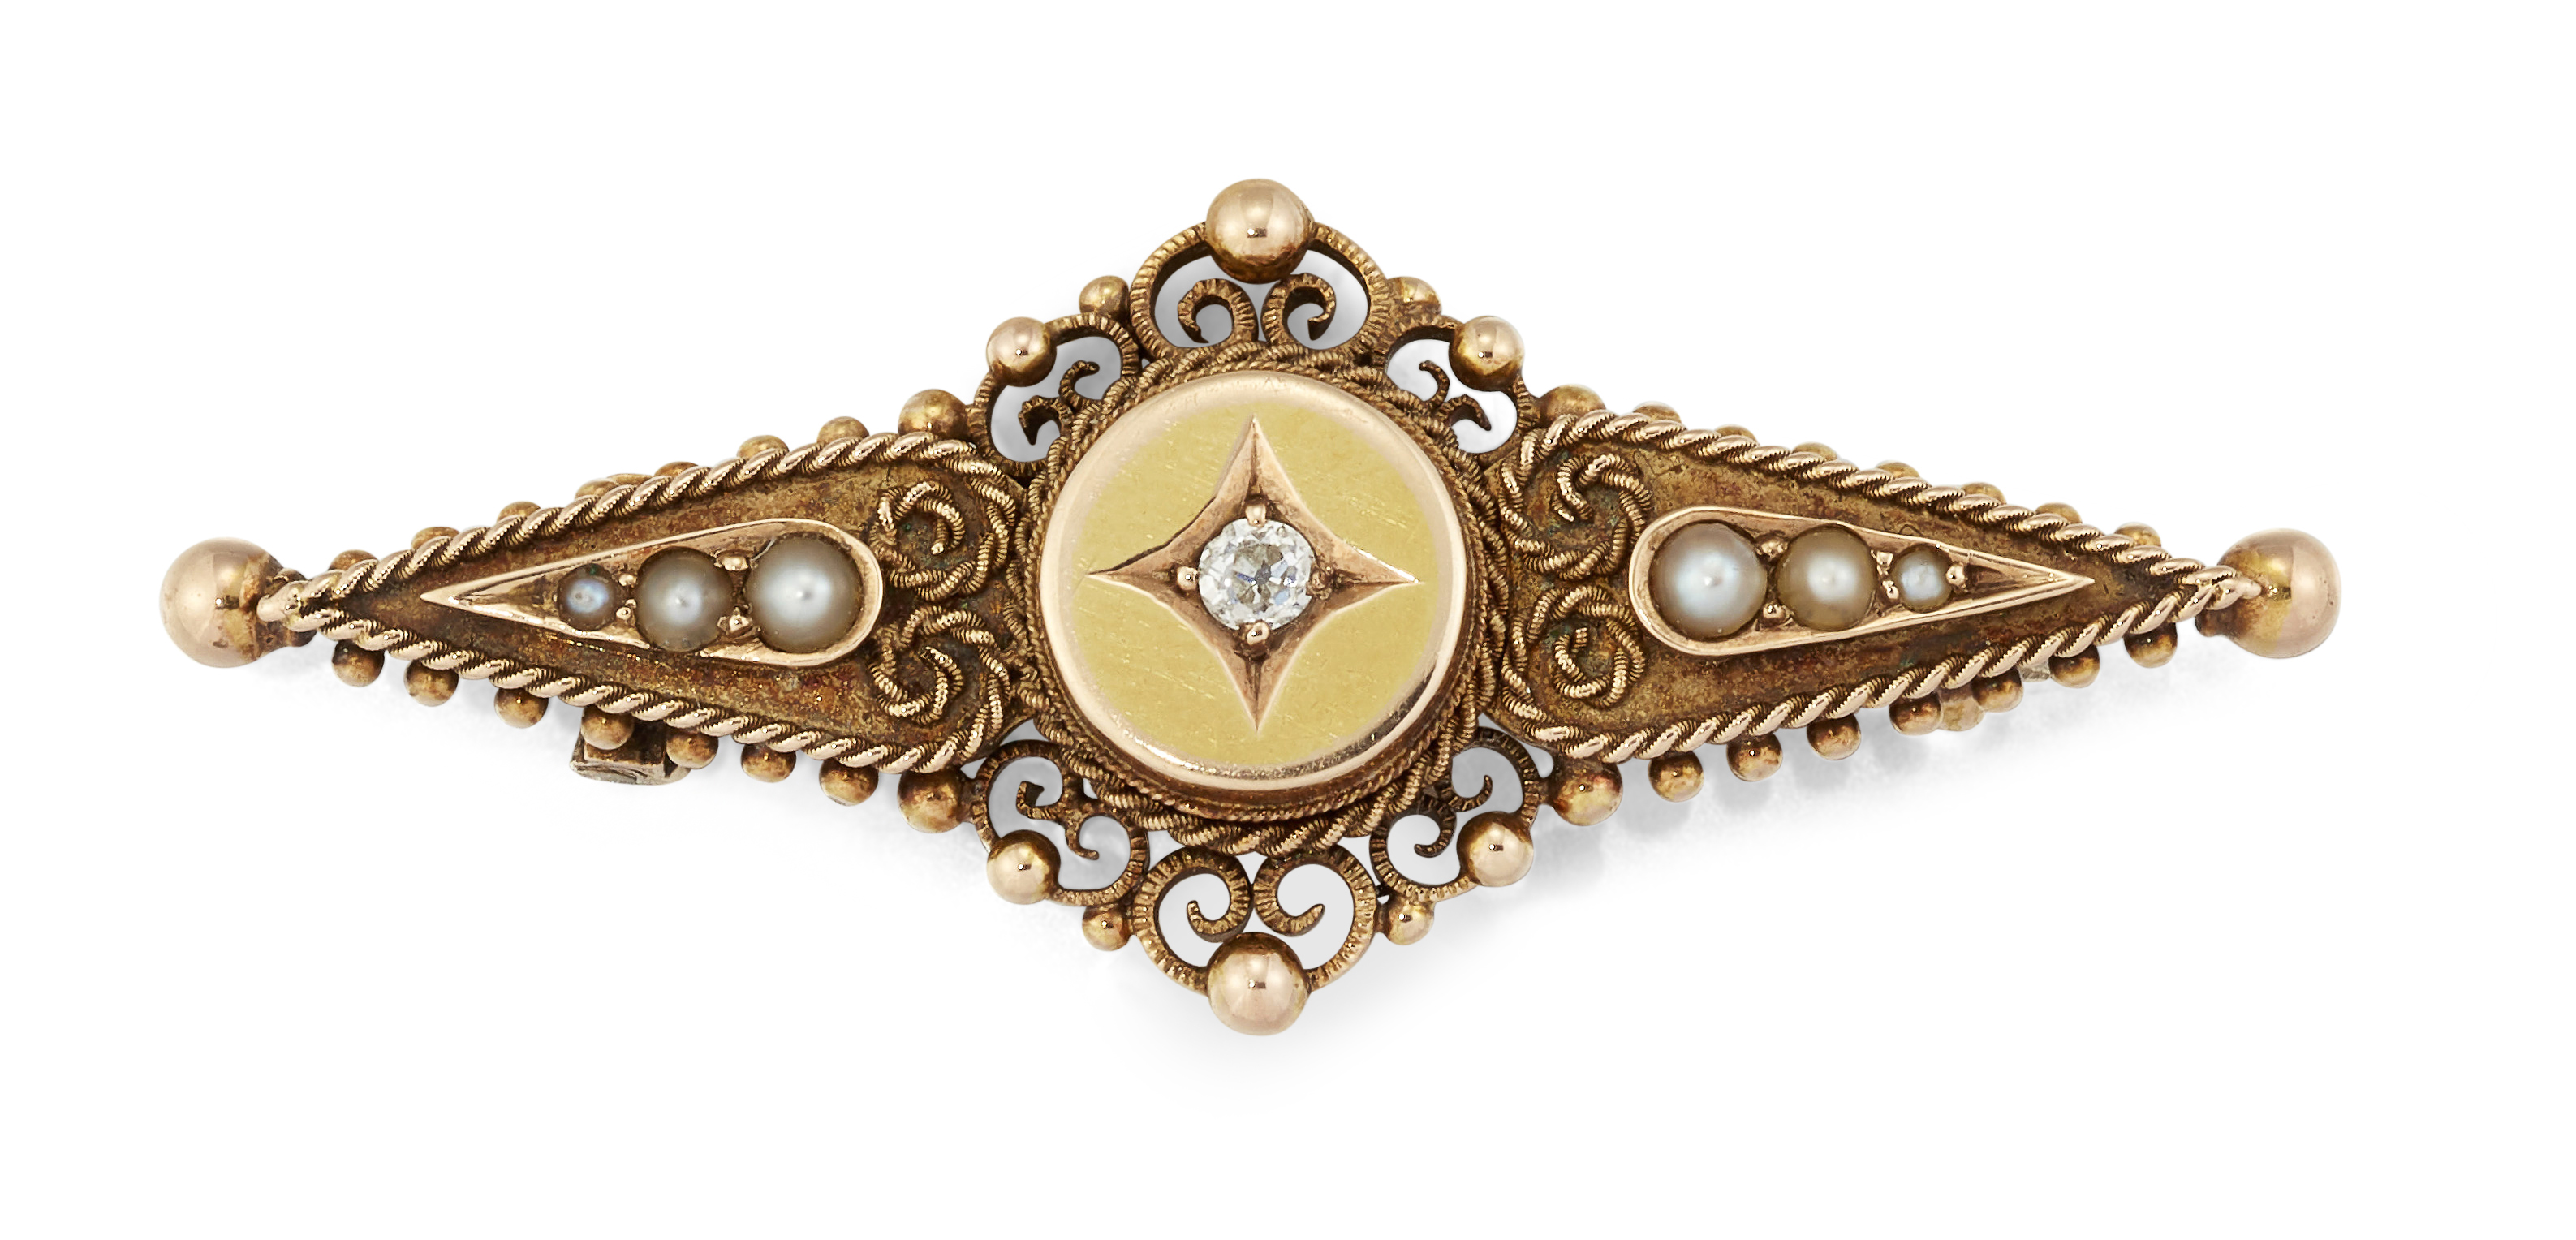 A VICTORIAN 15CT DIAMOND AND SEED PEARL BROOCH,